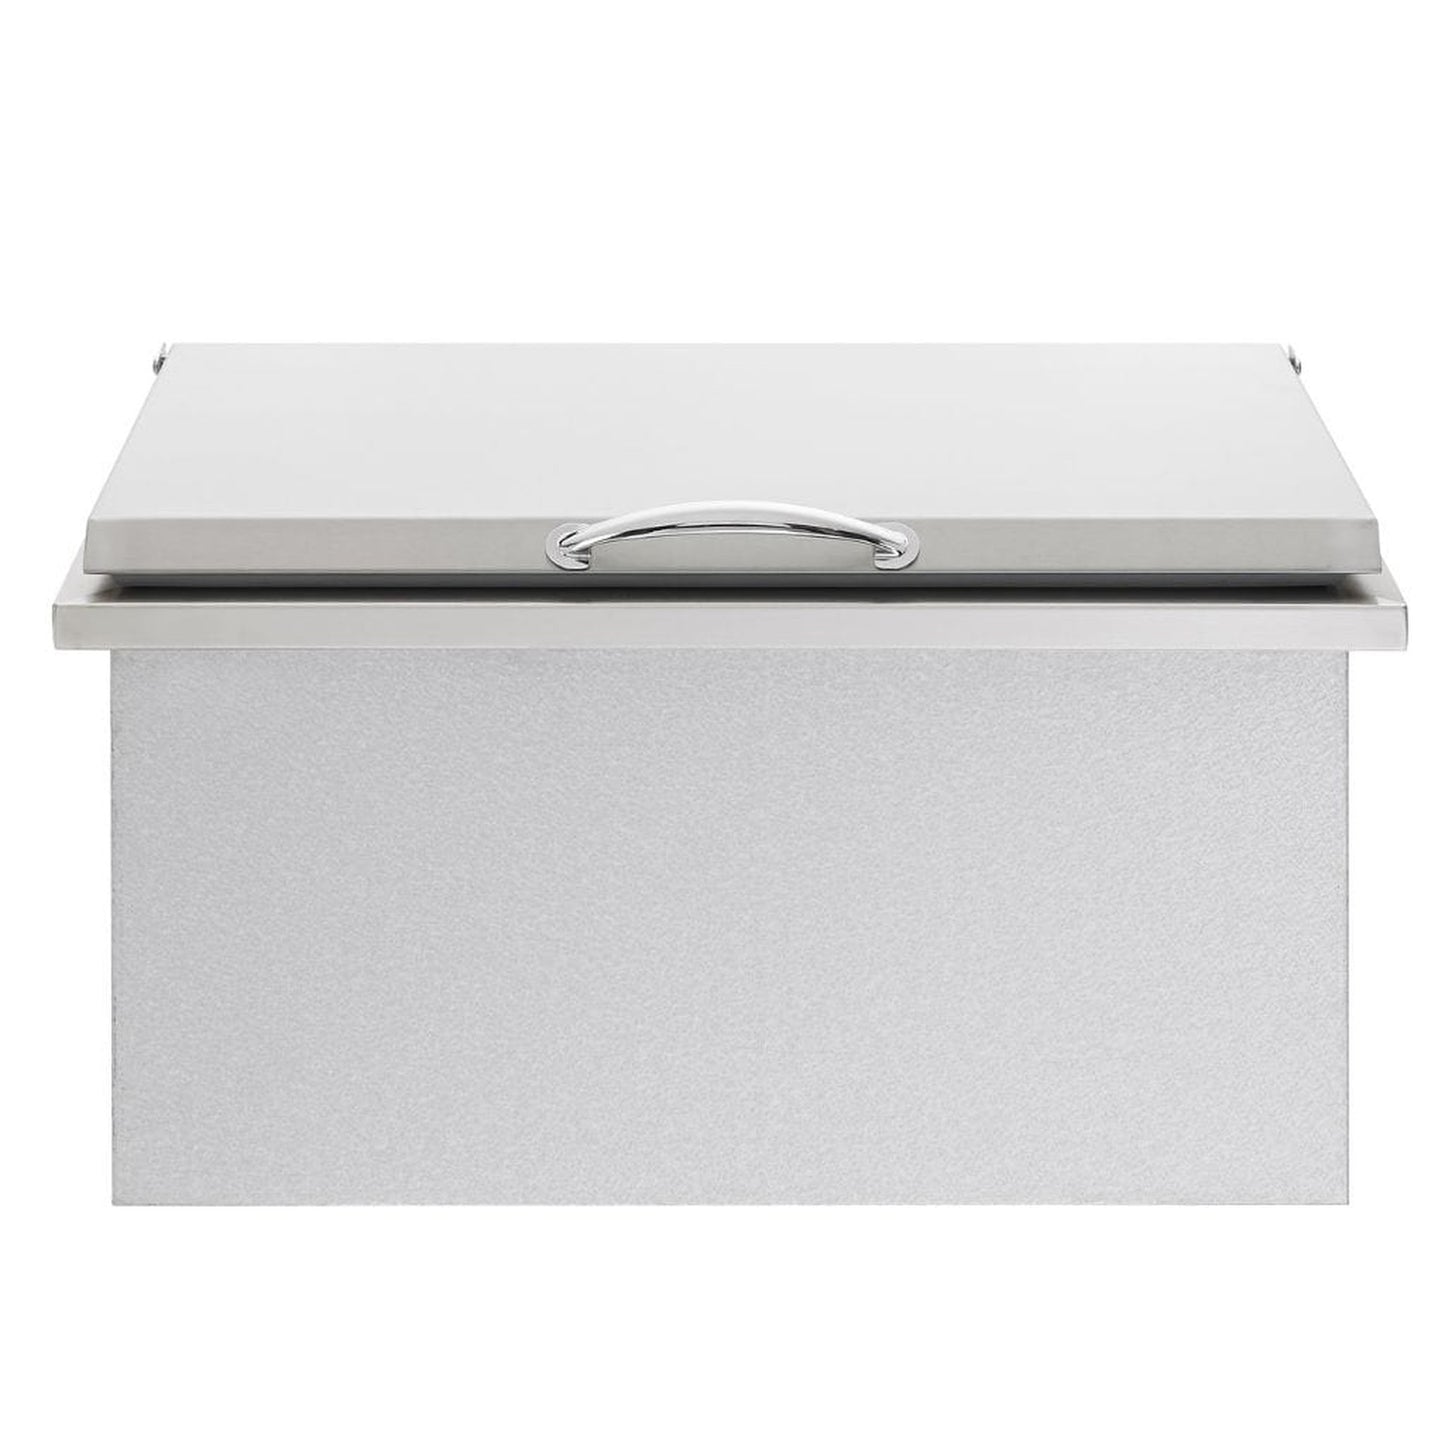 https://grillcollection.com/cdn/shop/files/Summerset-28-Stainless-Steel-Drop-In-Ice-Chest-Large-4.jpg?v=1685810803&width=1445